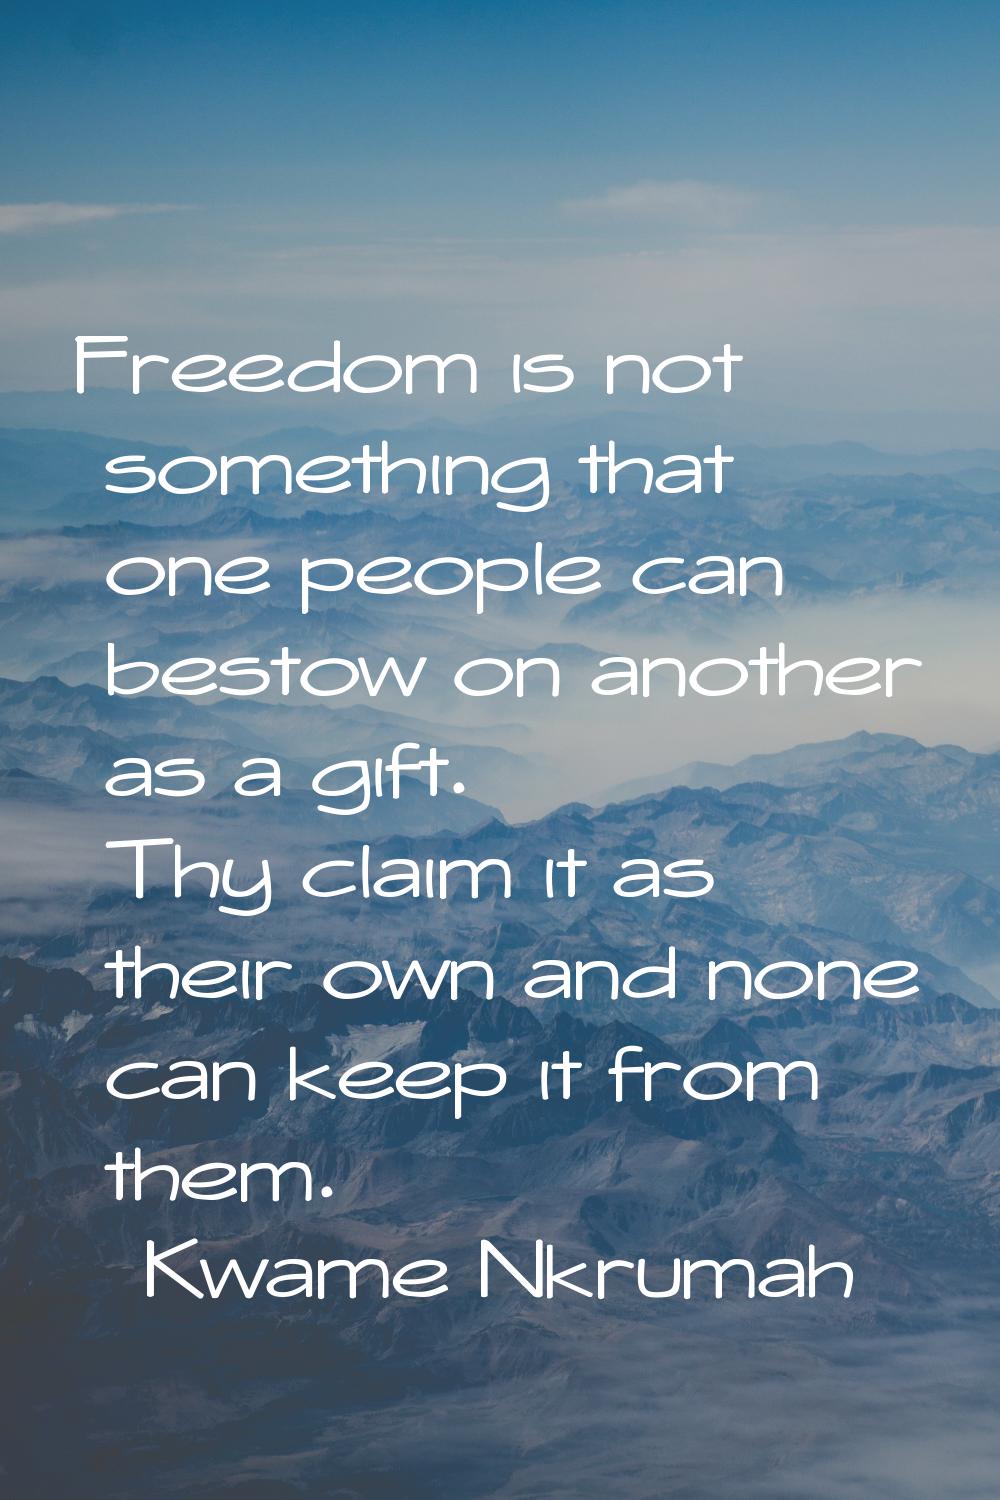 Freedom is not something that one people can bestow on another as a gift. Thy claim it as their own